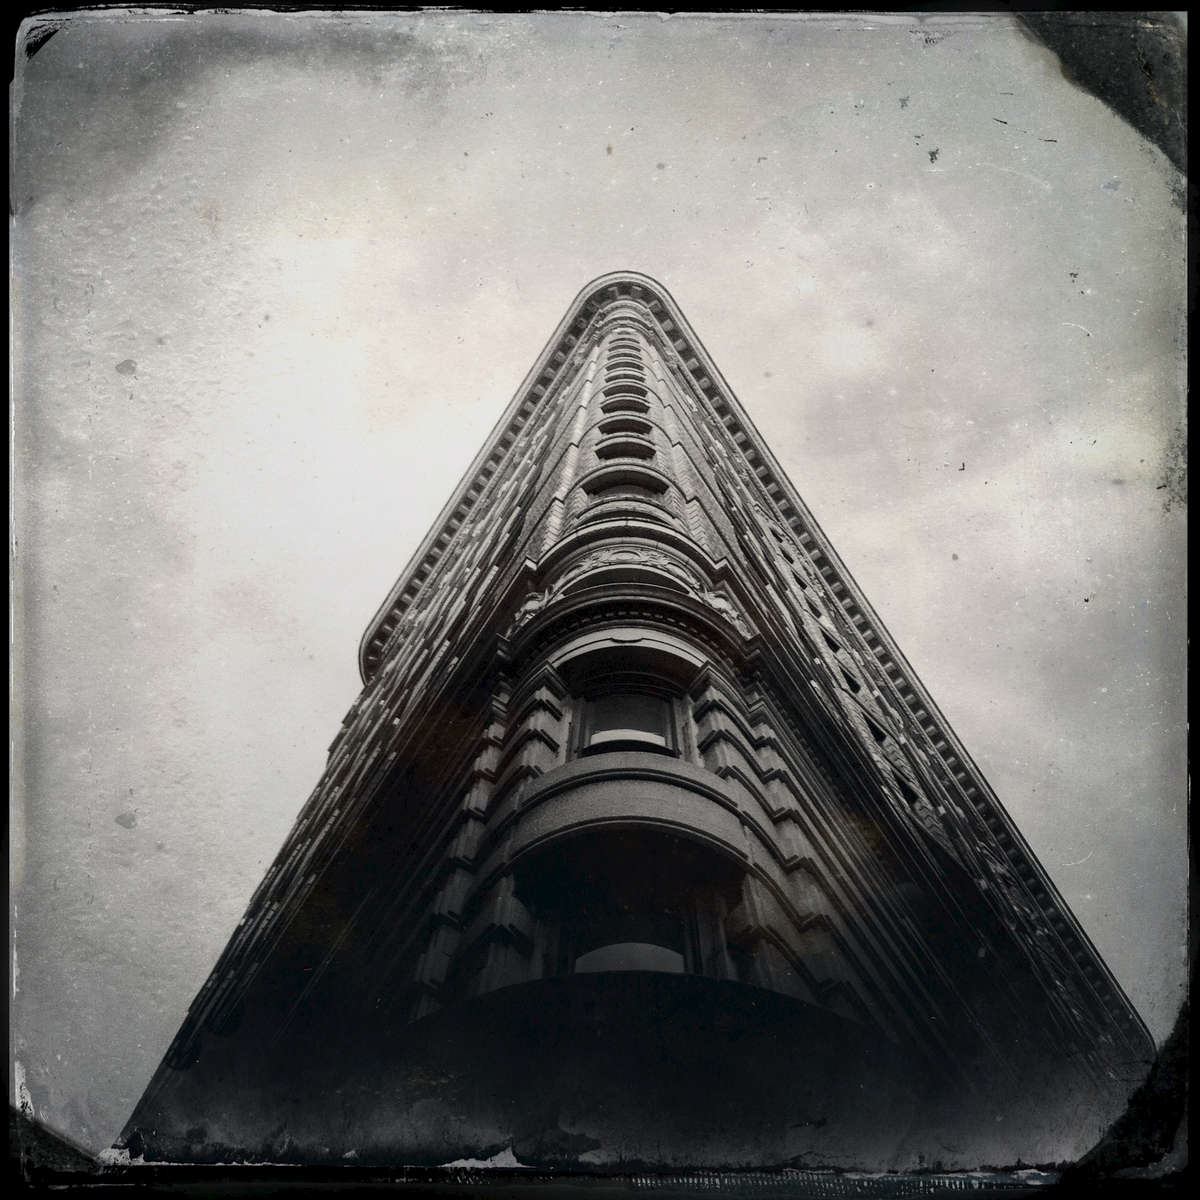 Flatiron Building in a muggy day, Sep. 2013.Self-MetaphorsThis is not only photo-documentary, but also a process of redefining of myself. All images were photographed after I was diagnosed with a cancer. Lucky it was a first stage and cured so far. Yet I still have a deep fear of the returning. In this sense, photography could be a therapy. Through the process, I can rethink of life and explore identity. Each photograph contains many of my own views or personal matters. Indeed, by doing so, I am exploring, even shooting self-metaphors of mine. The caption information: 